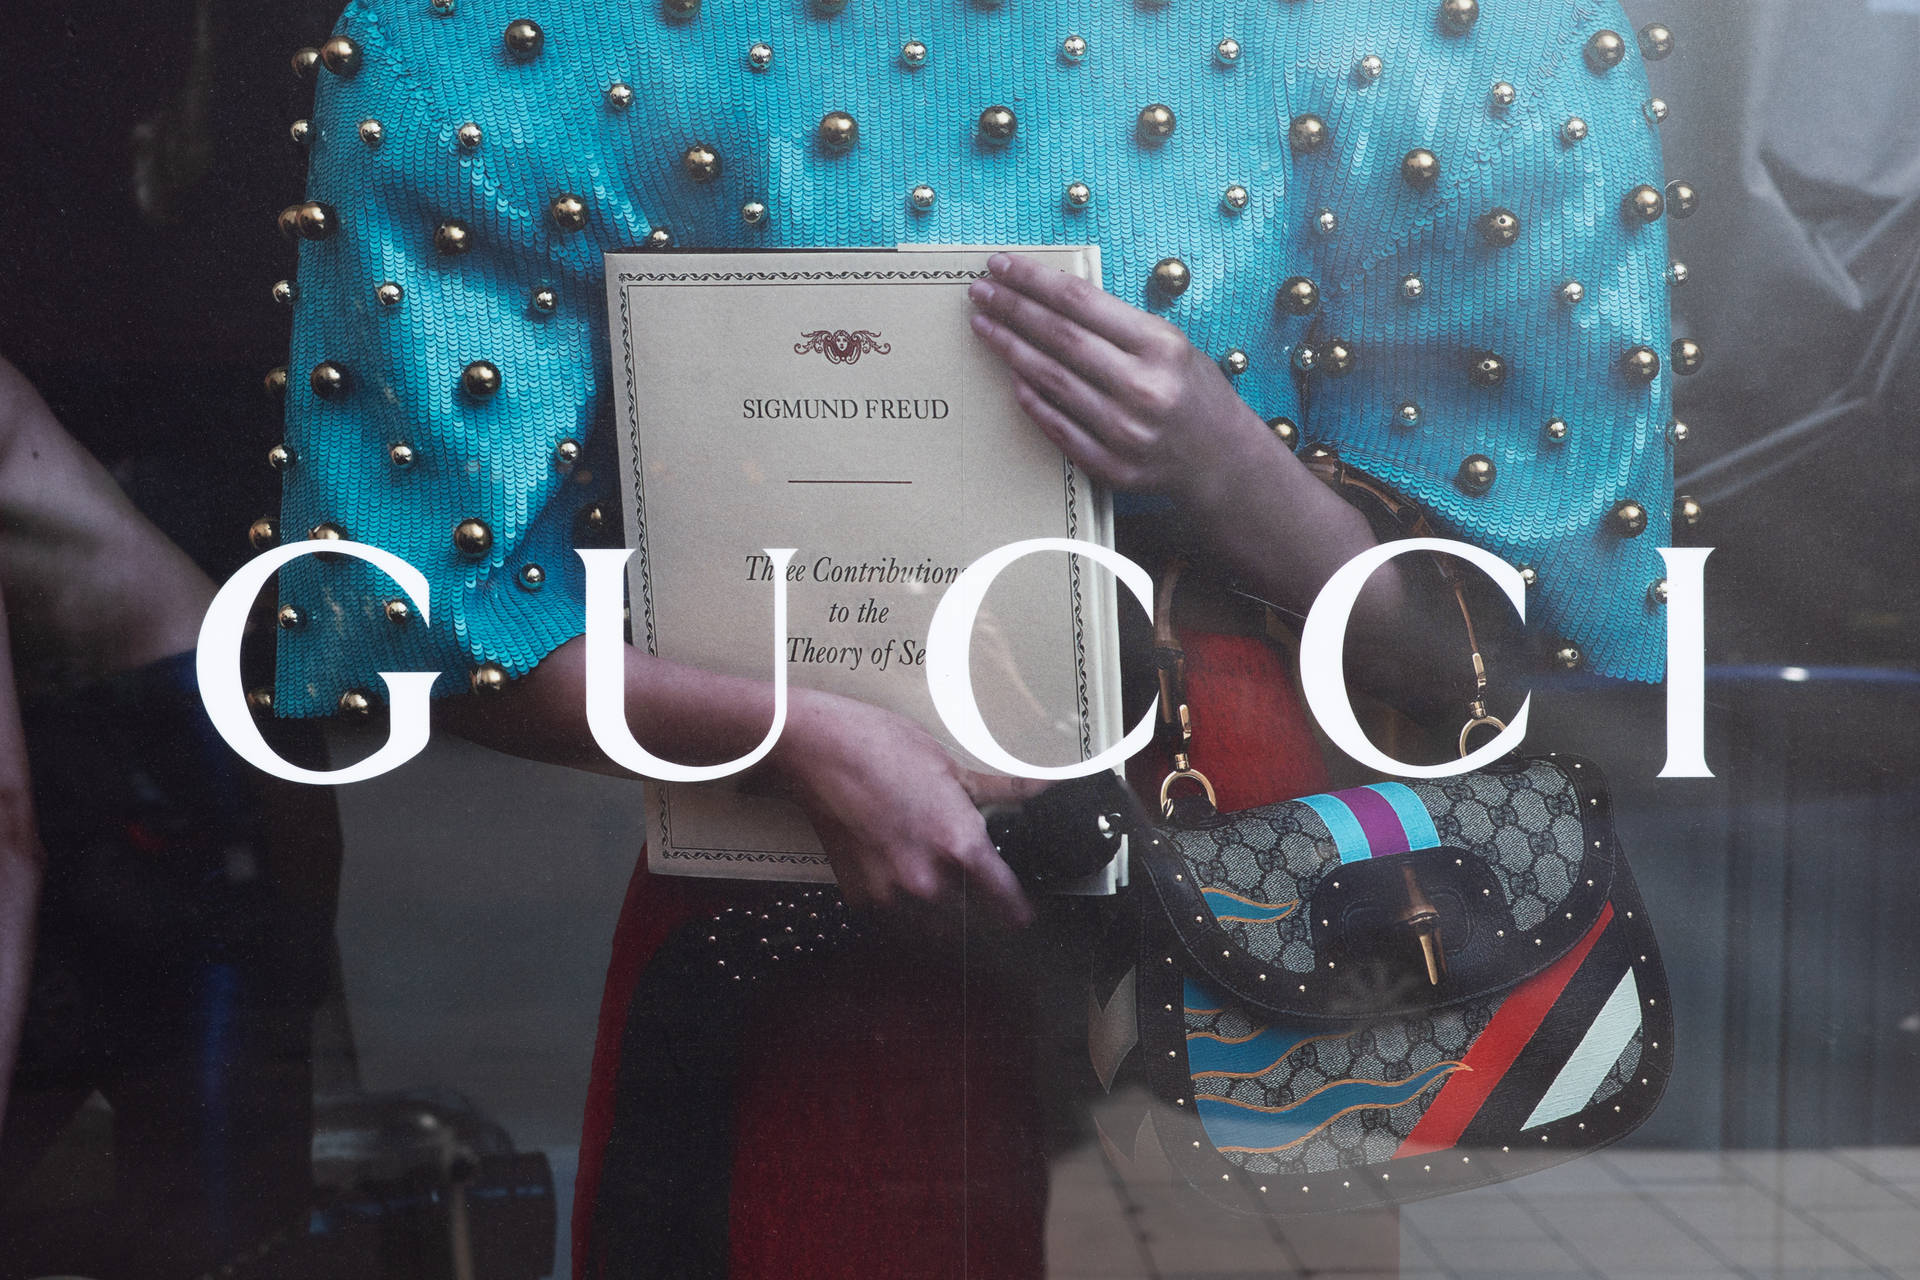 Gucci 6000X4000 Wallpaper and Background Image